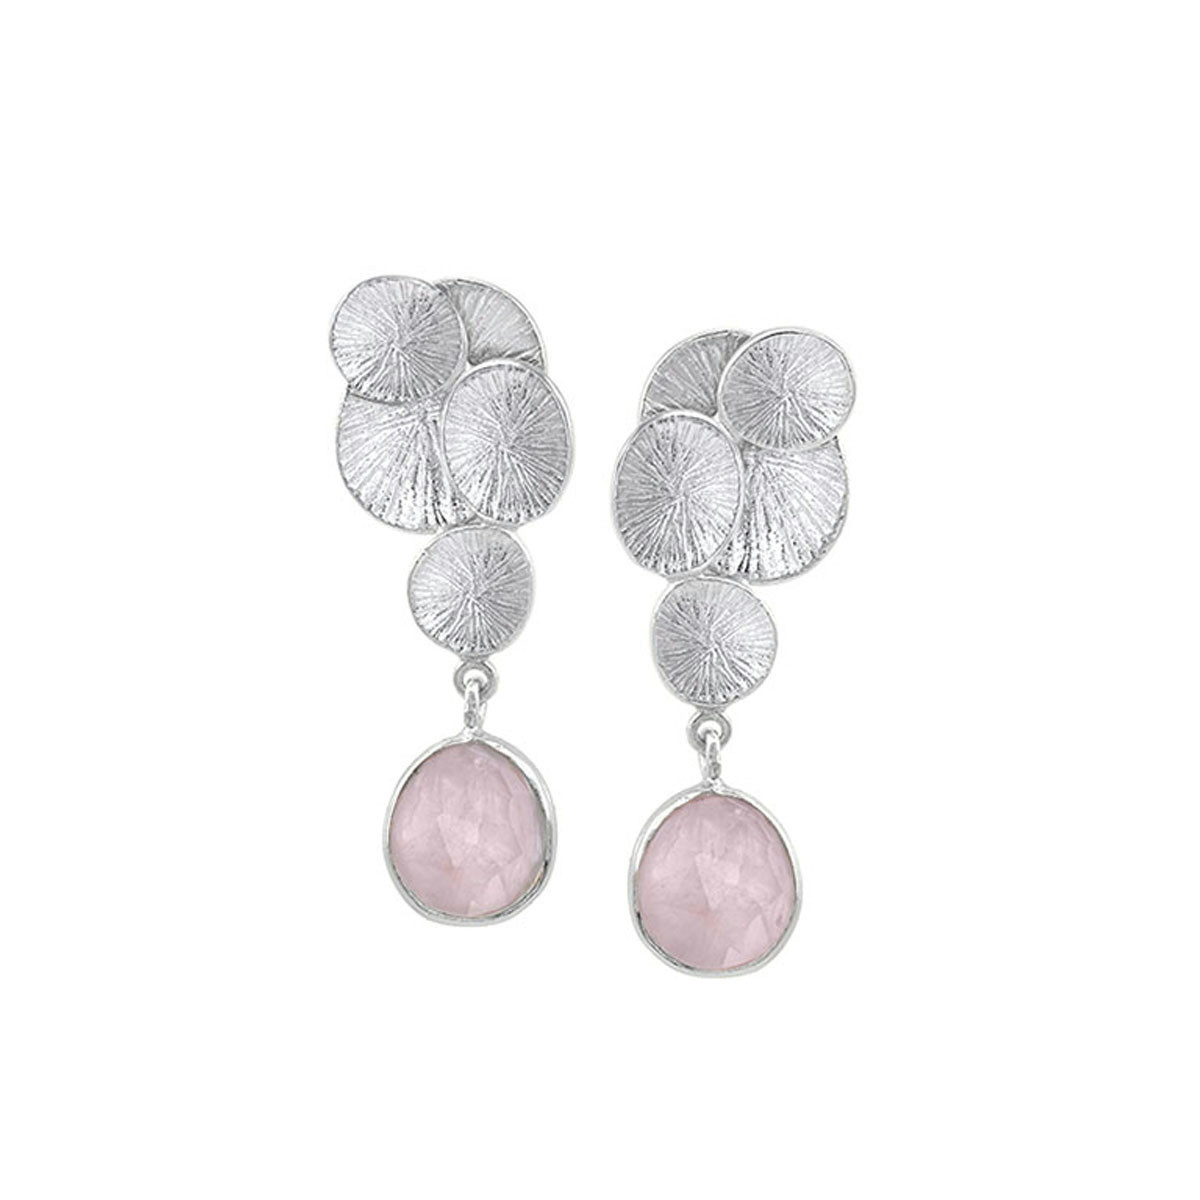 LILY Earrings in Silver with Rose Quartz.